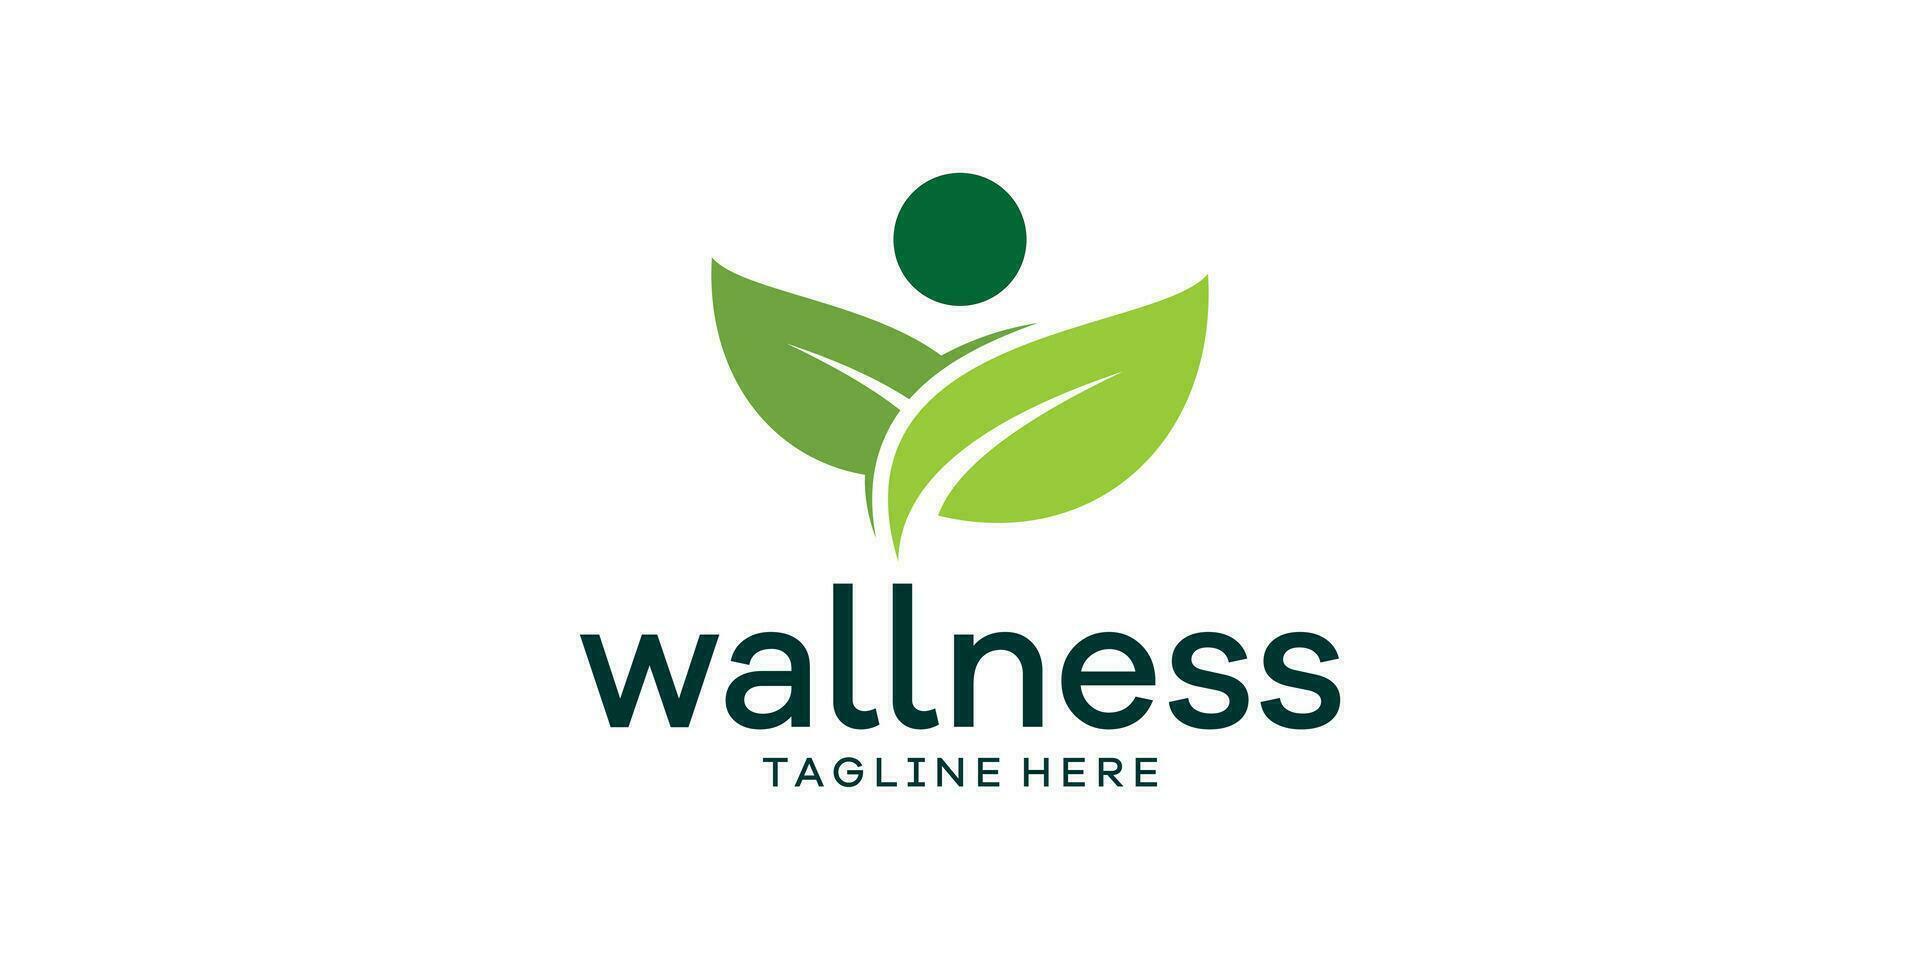 Wellness, health, fitness logo design inspiration, combination of people and leaves. vector